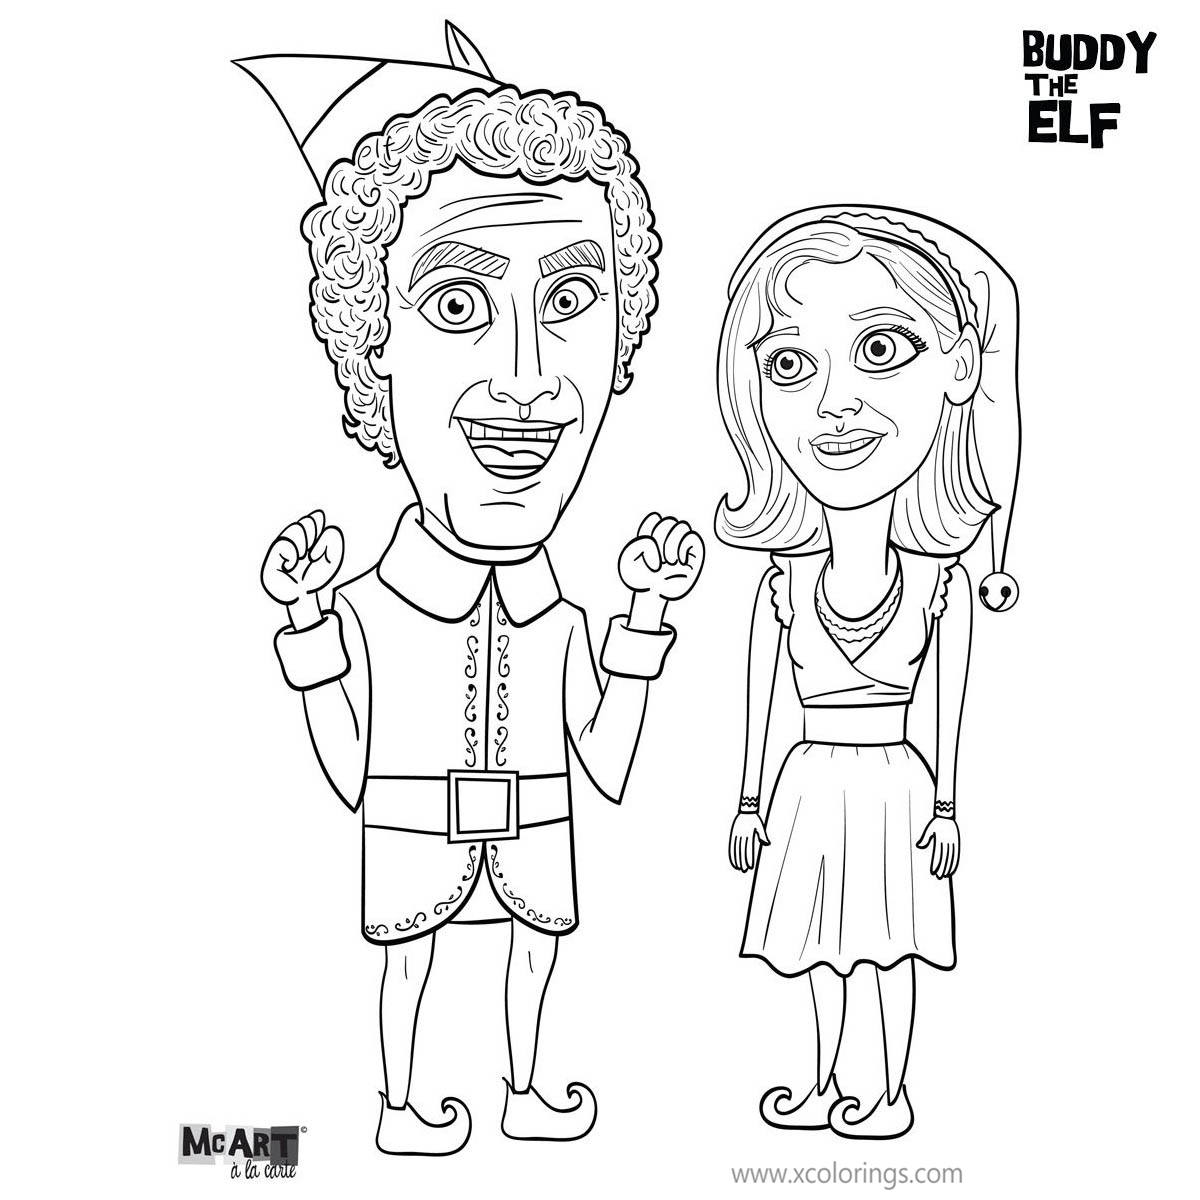 Free Buddy The Elf Coloring Pages Buddy andJovie printable